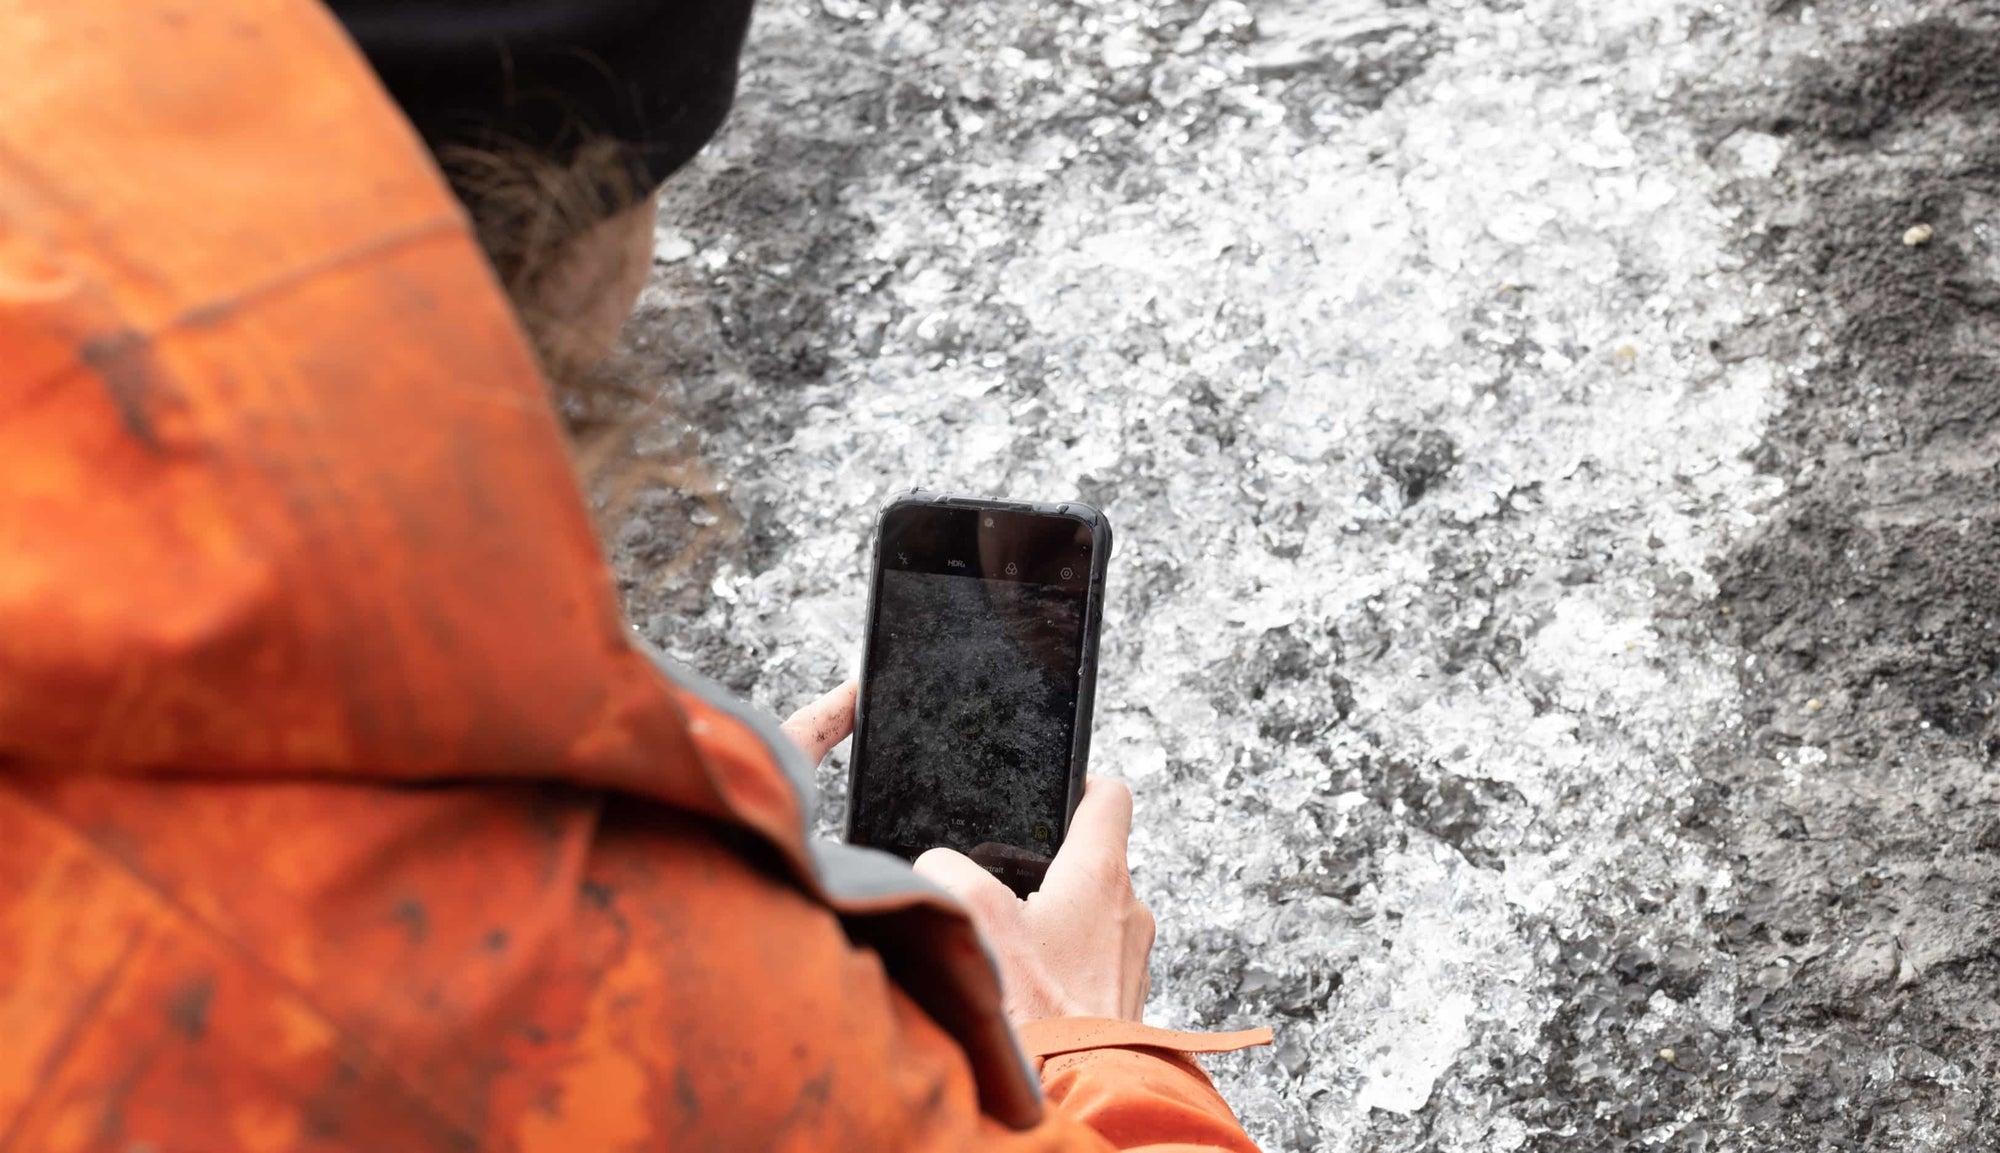 Why regular smartphone is useless in extreme cold condition?